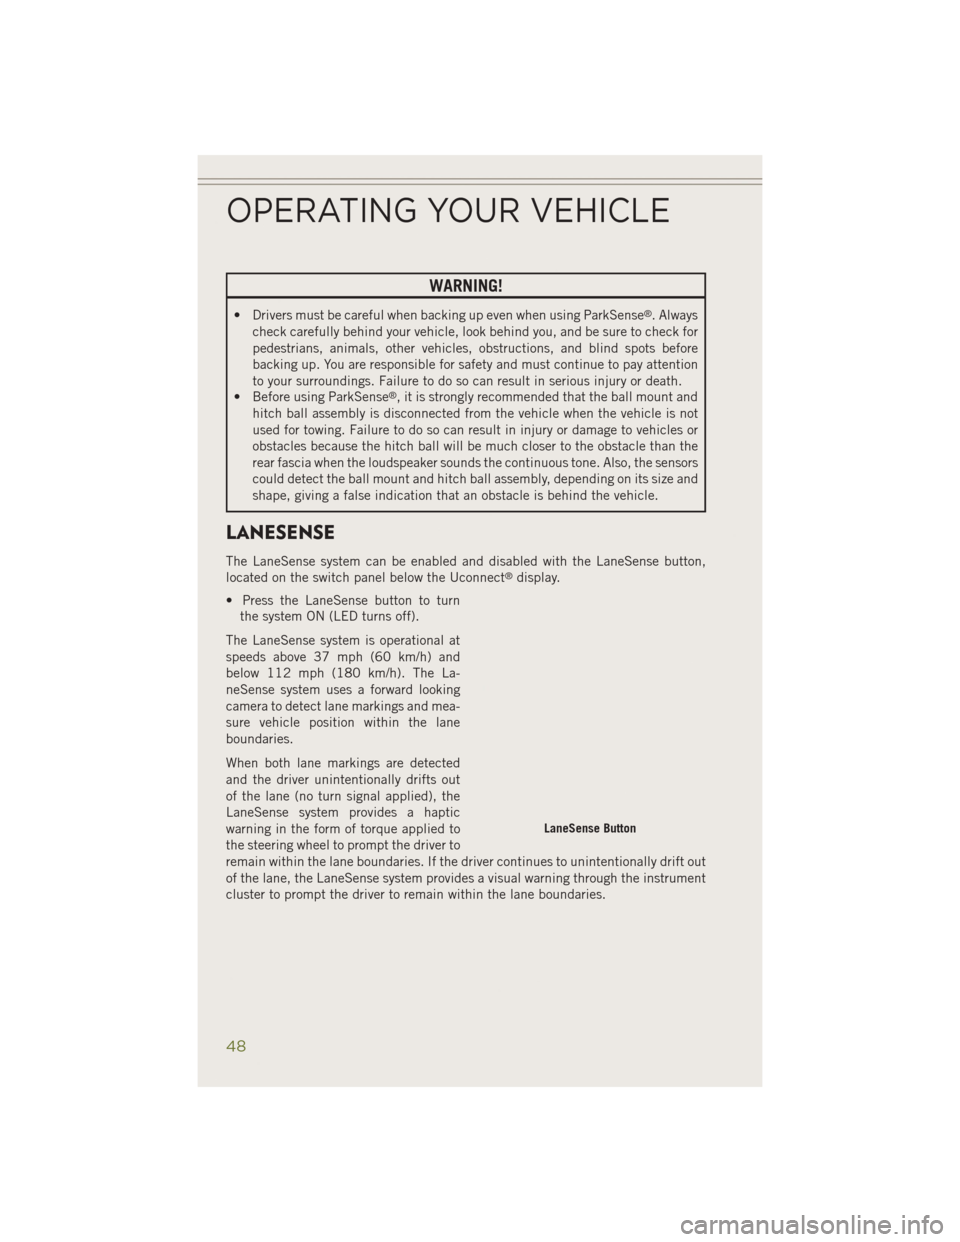 JEEP CHEROKEE 2014 KL / 5.G User Guide WARNING!
• Drivers must be careful when backing up even when using ParkSense®. Always
check carefully behind your vehicle, look behind you, and be sure to check for
pedestrians, animals, other vehi